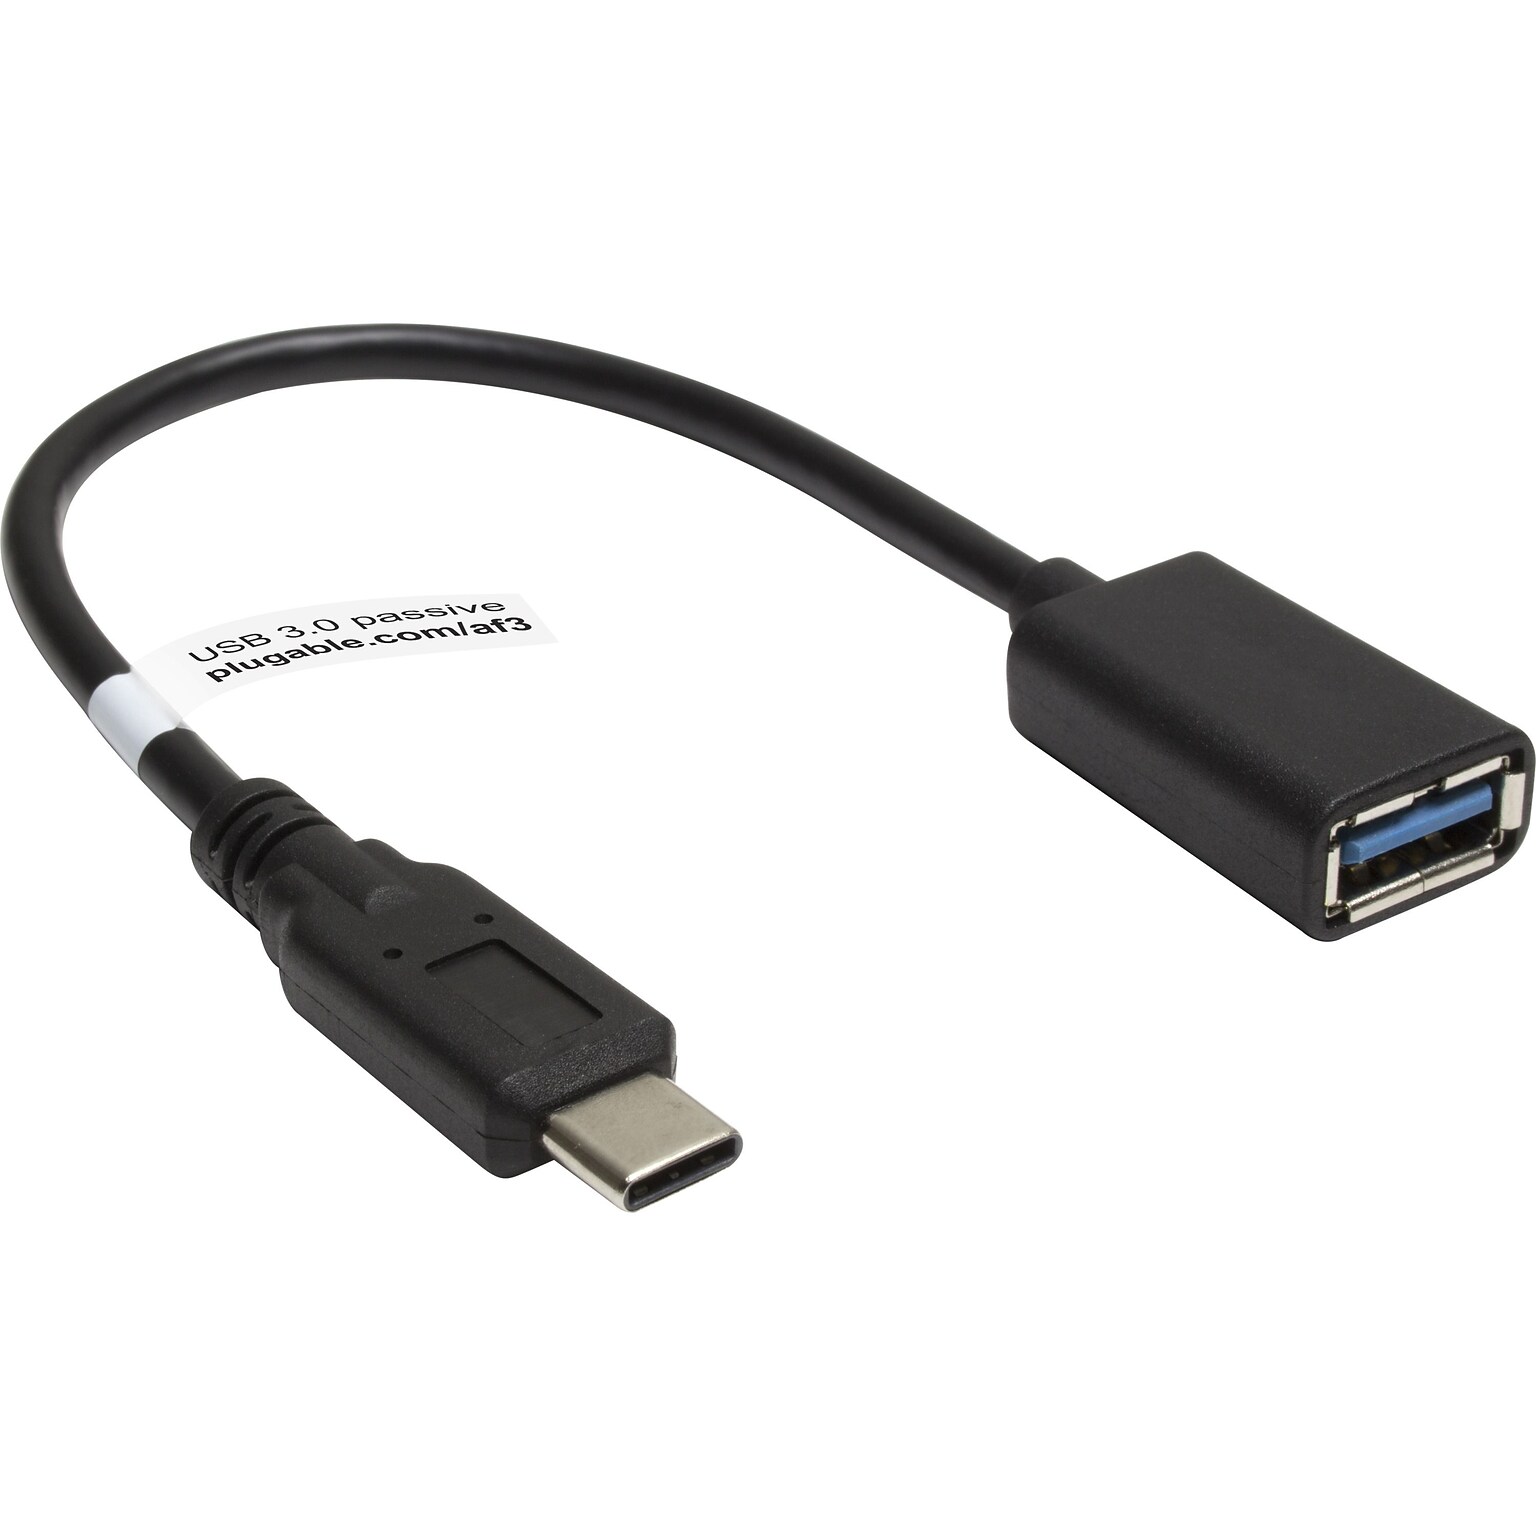 Plugable 6 USB 3.0 Type C to Type A Male/Female Passive Data Transfer Cable; Black (USBC-AF3)